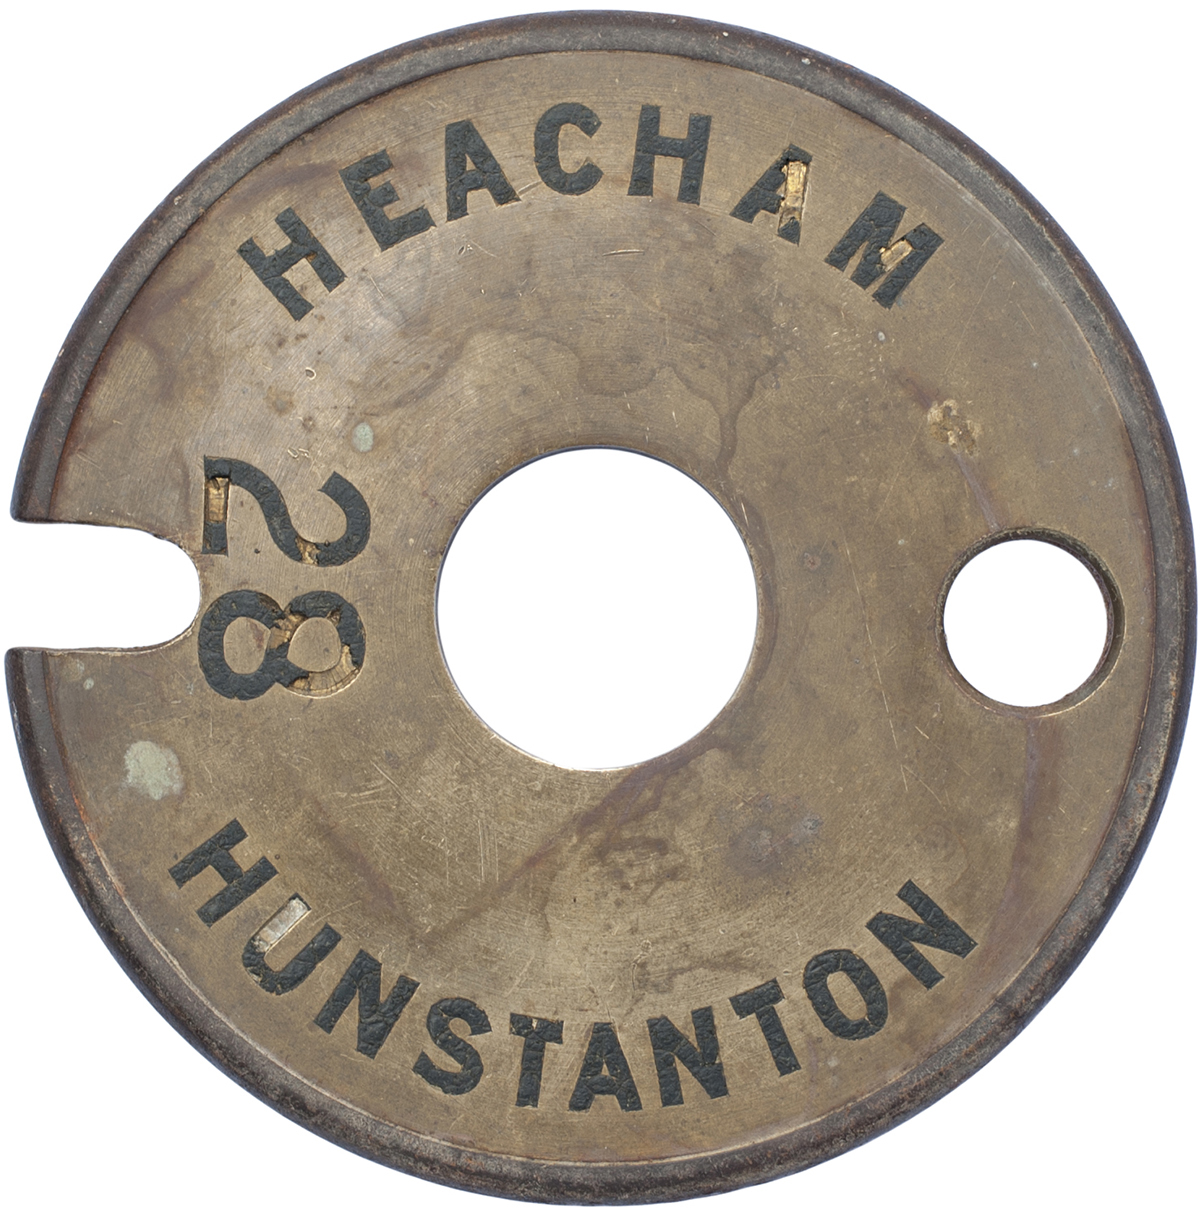 Tyers No 6 brass and steel single line tablet HEACHAM 28 HUNSTANTON. From the former Great Eastern